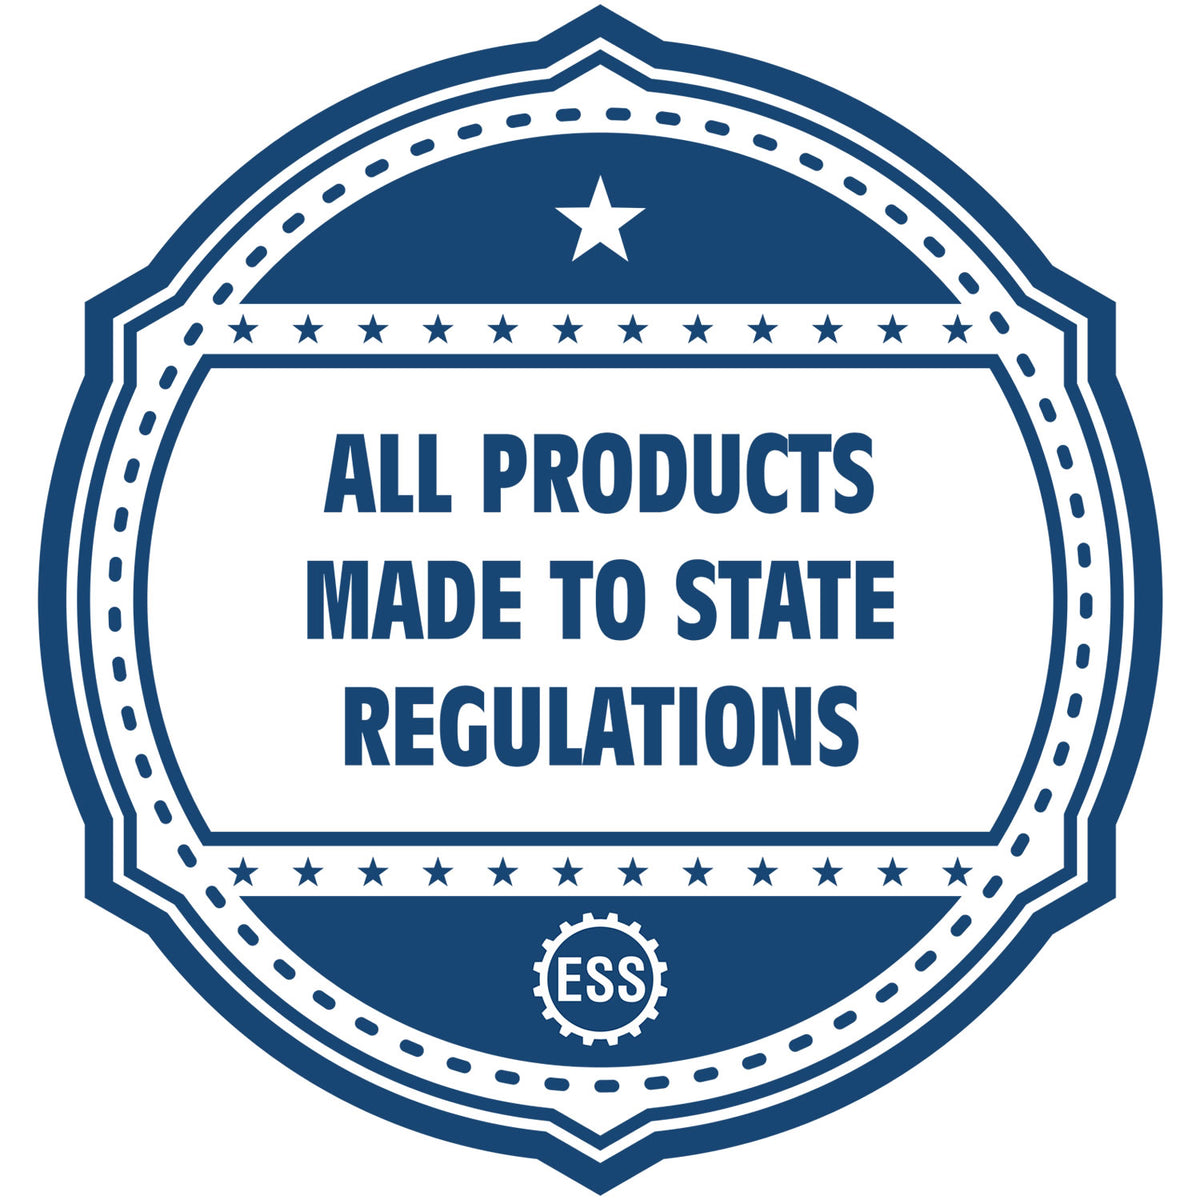 An icon or badge element for the Soft Pocket Idaho Landscape Architect Embosser showing that this product is made in compliance with state regulations.